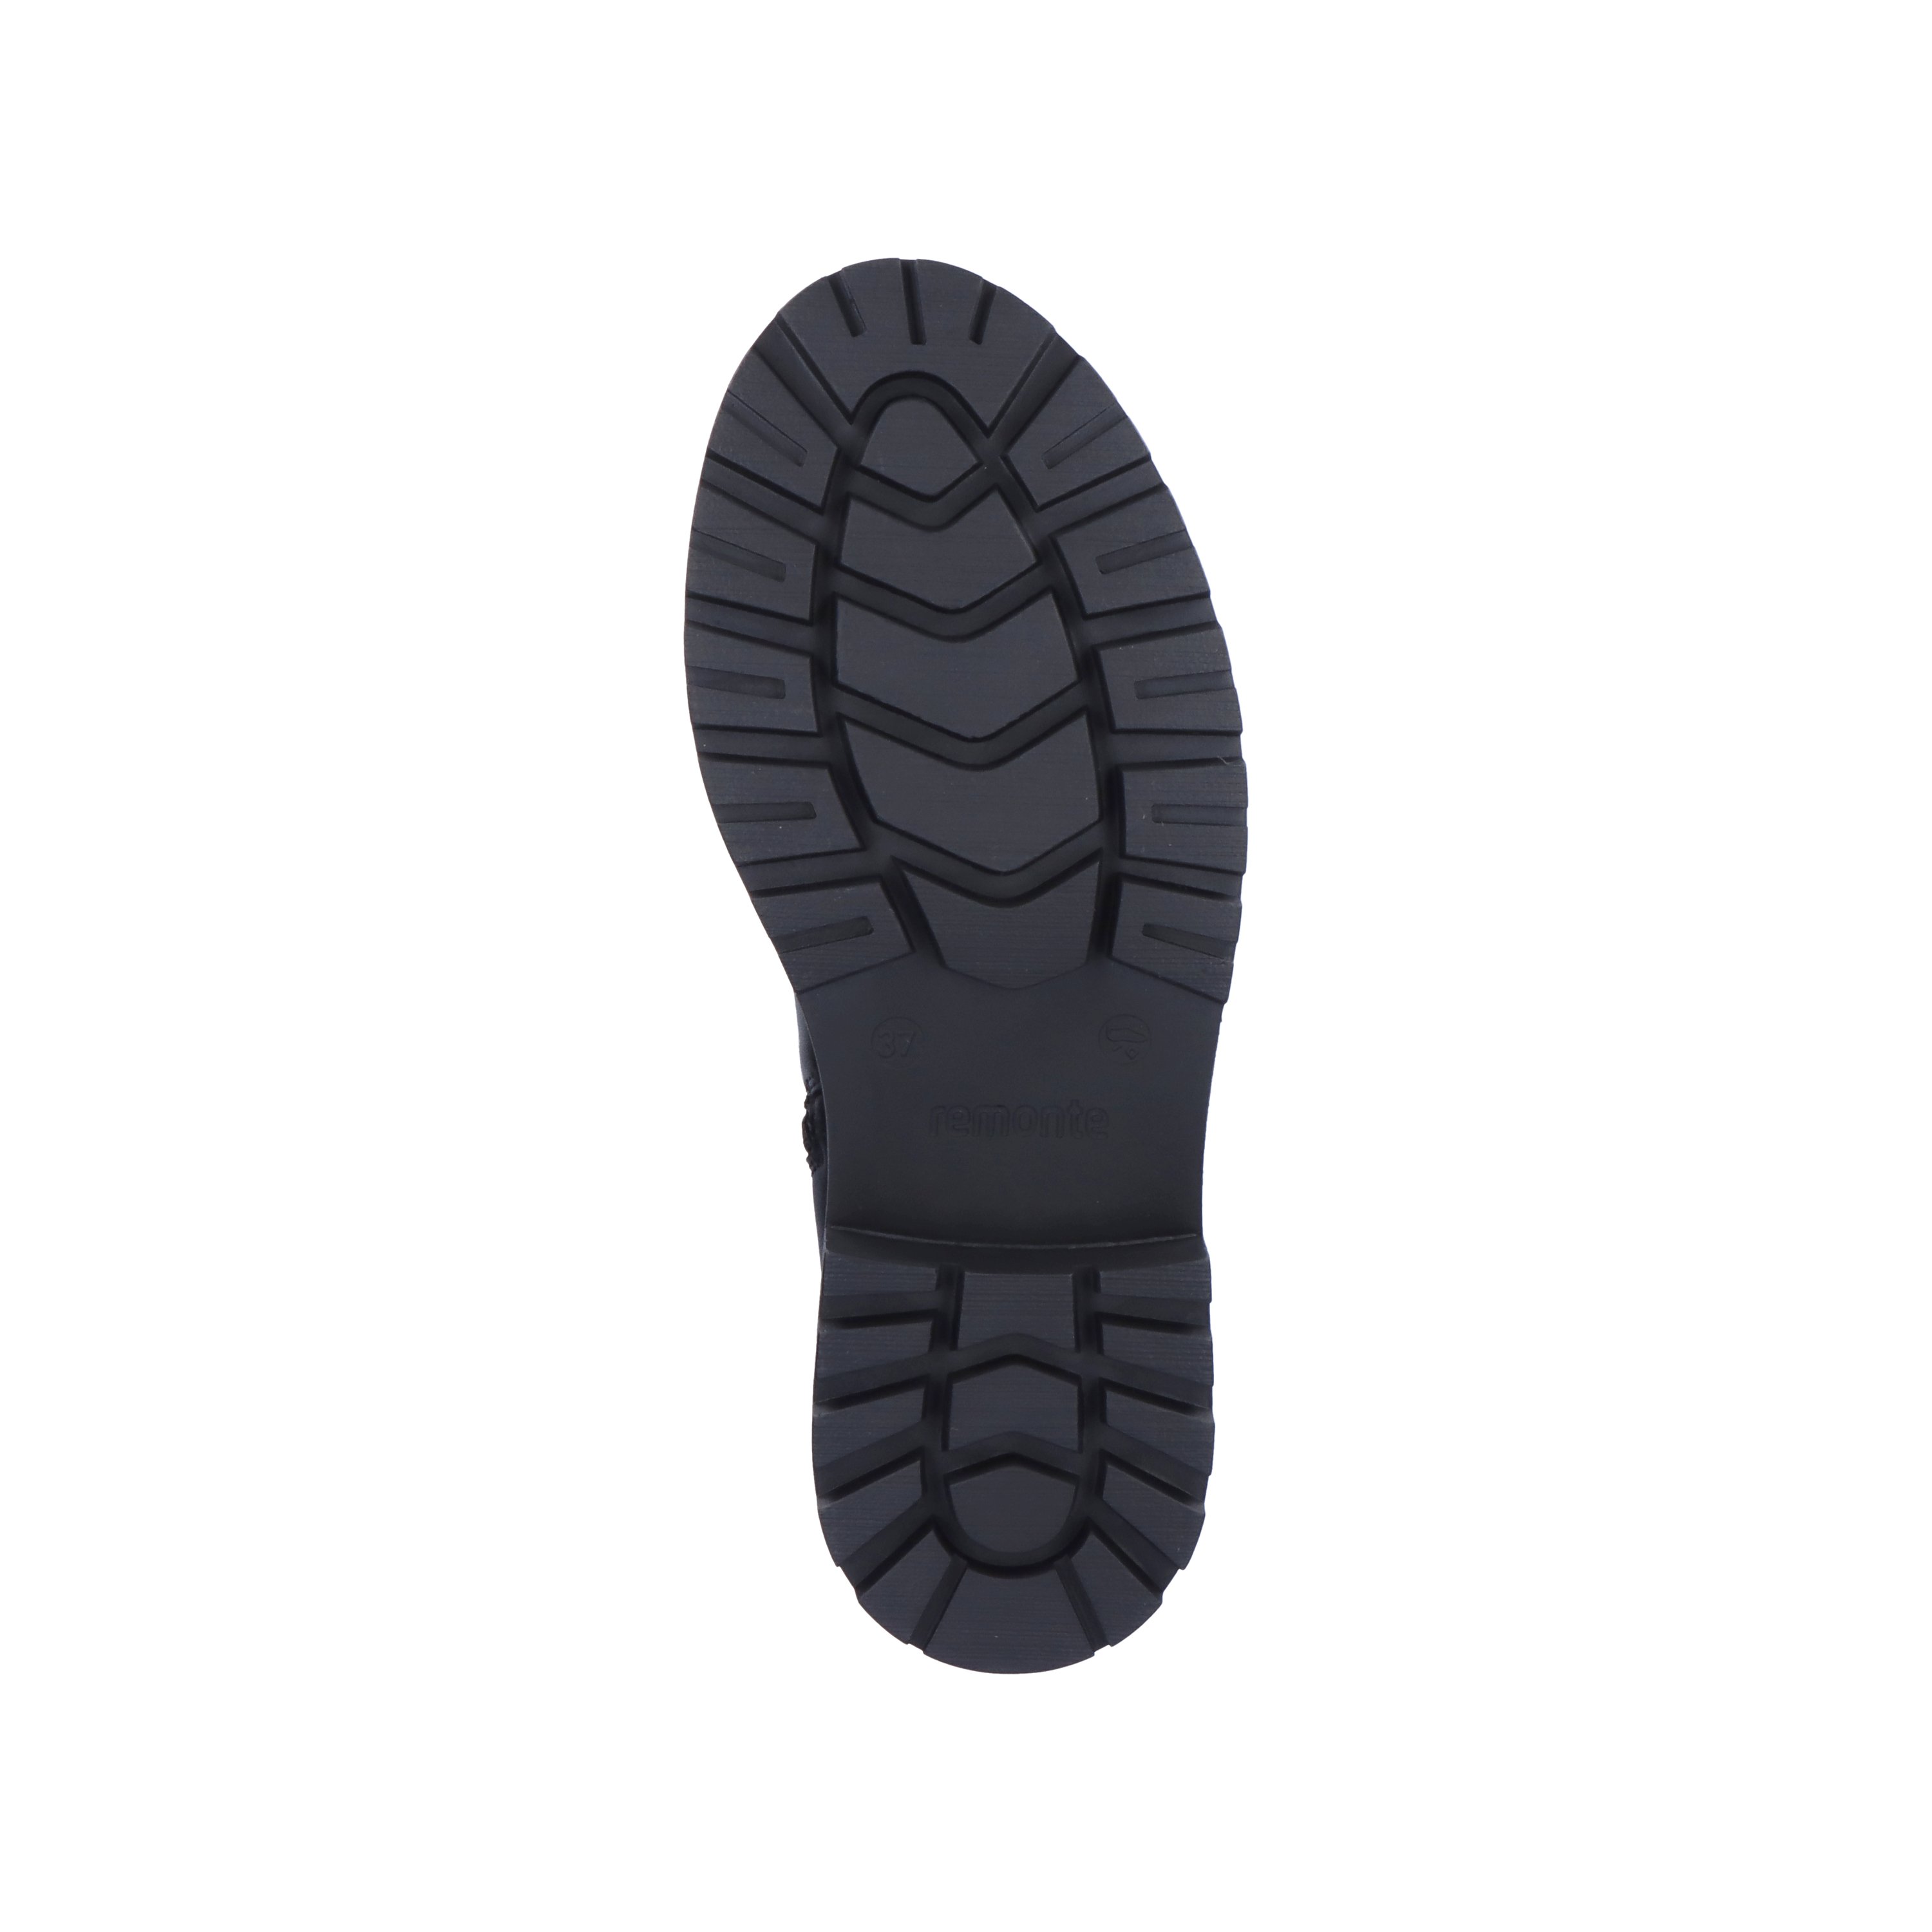 Asphalt black remonte women´s high boots D0B72-01 with cushioning profile sole. Outsole of the shoe